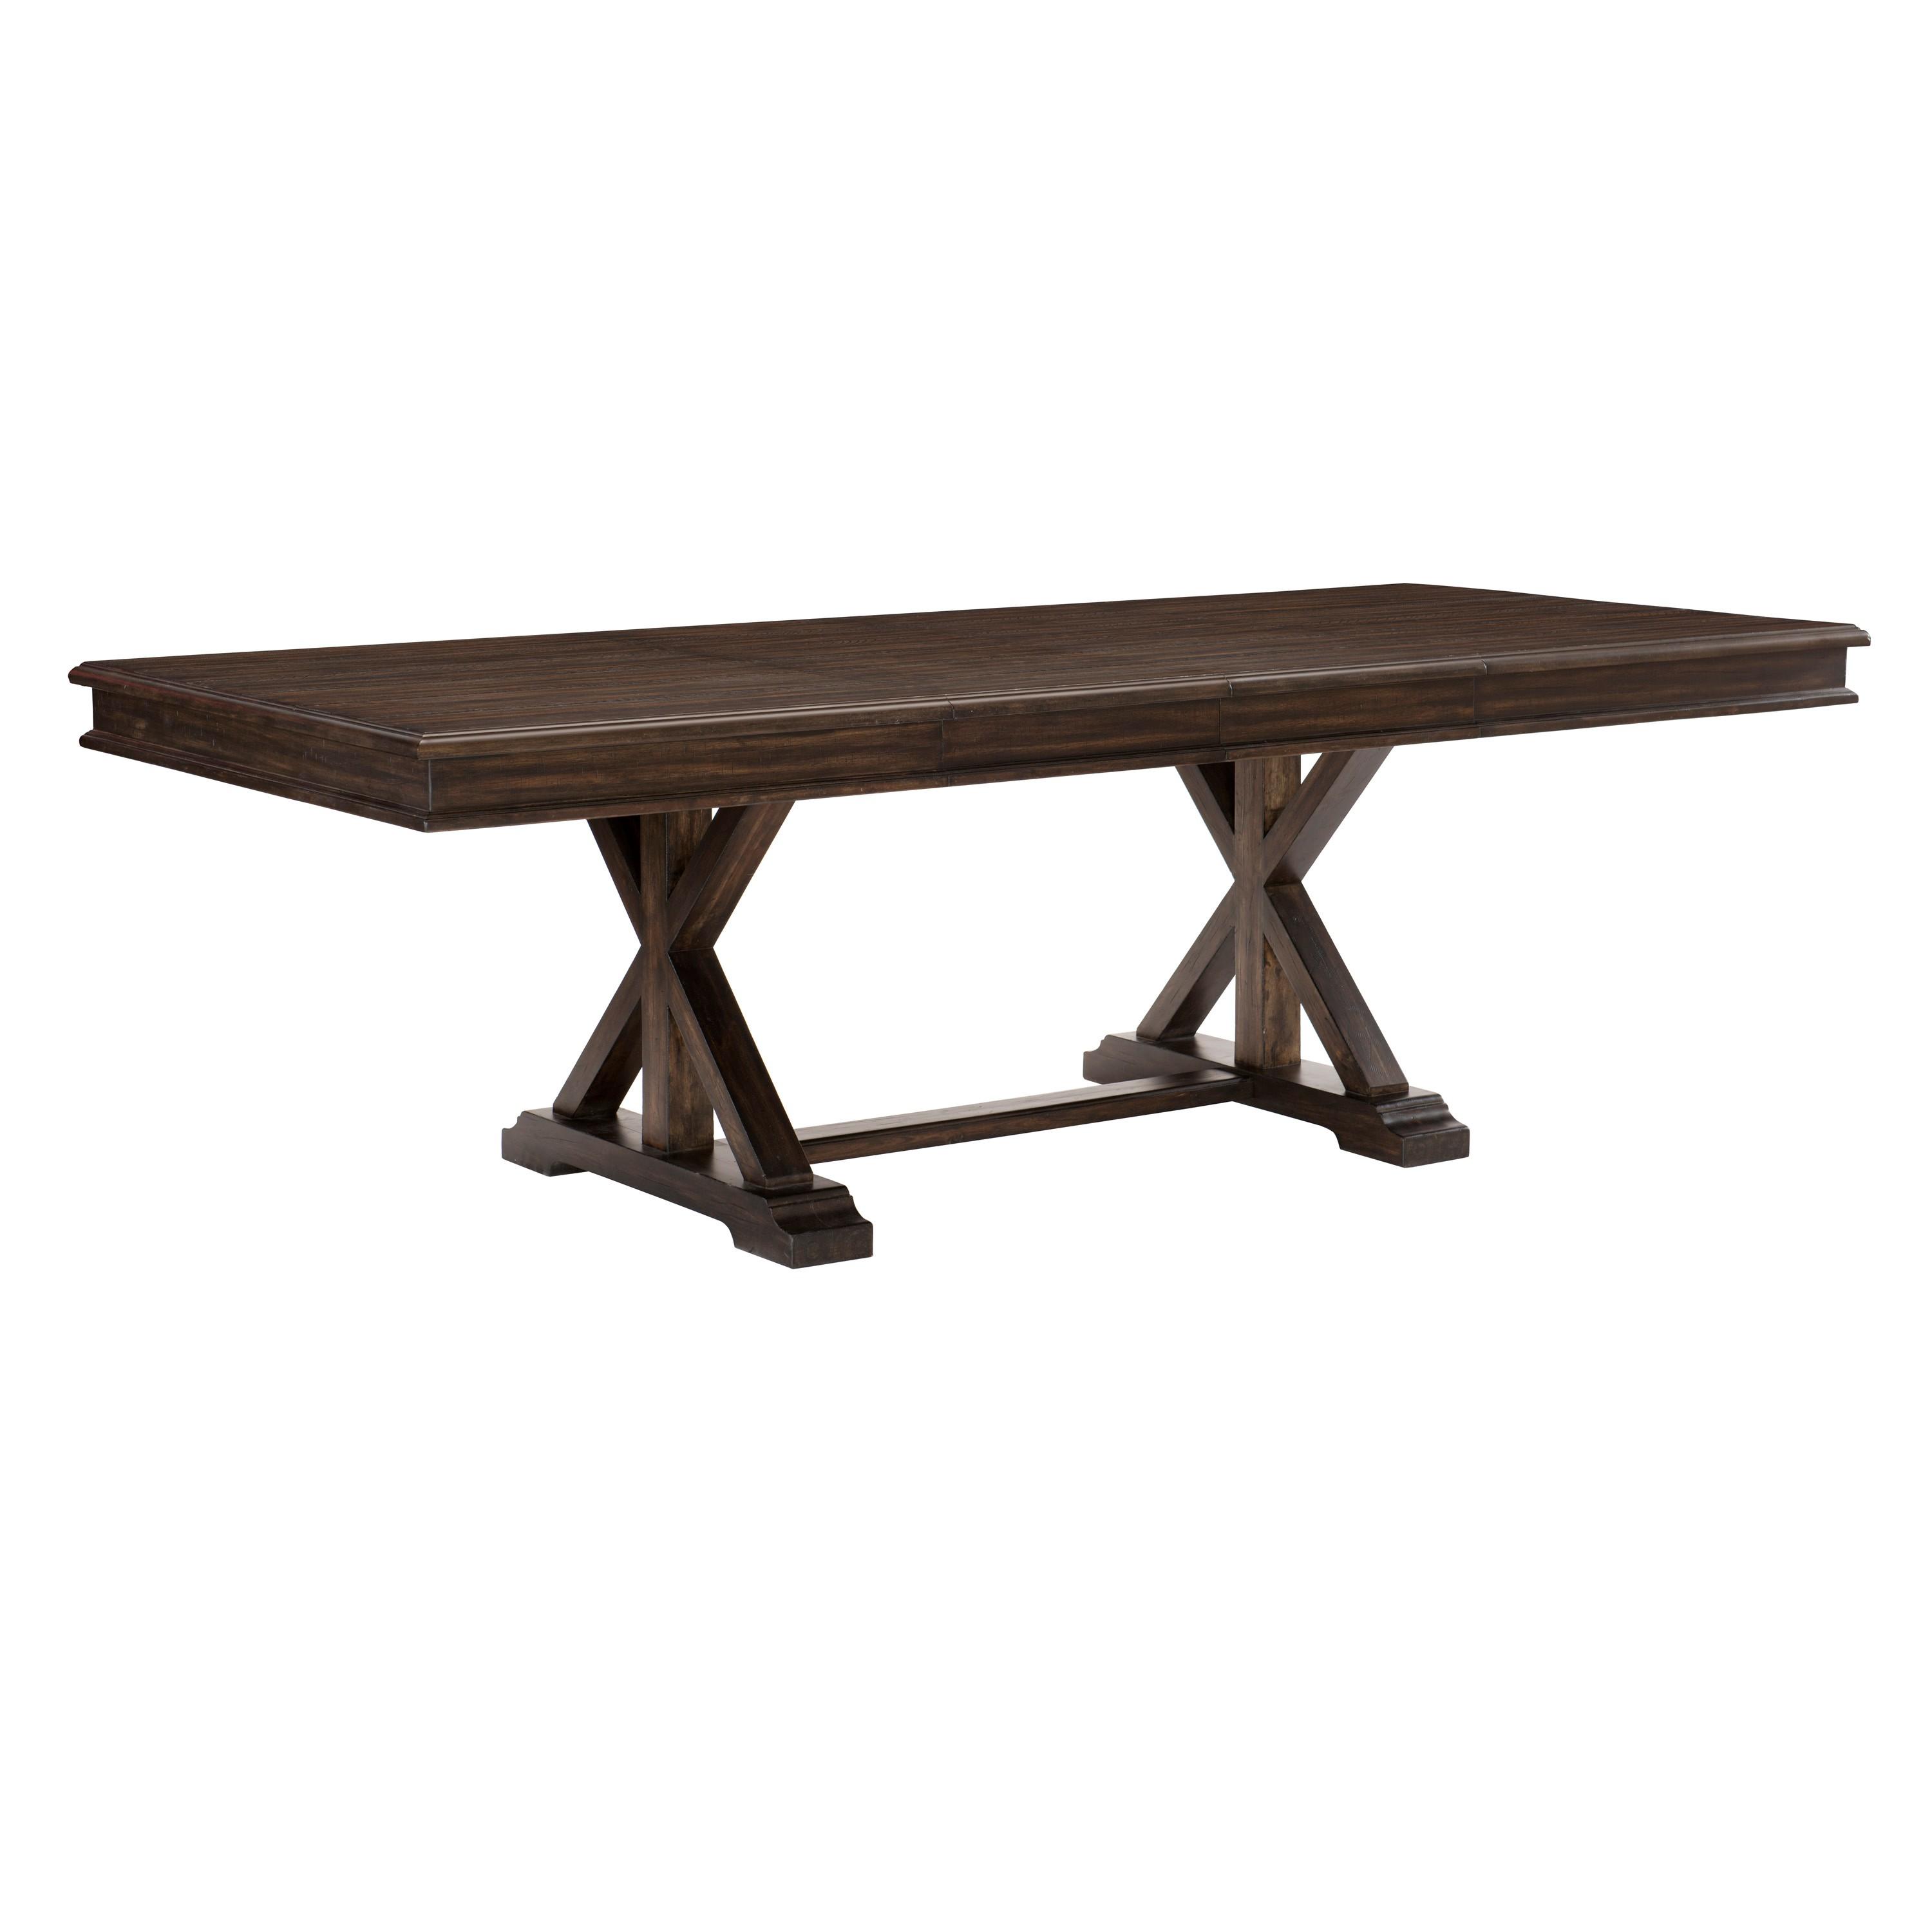 Transitional Dining Table 1689-96* Cardano 1689-96* in Charcoal 